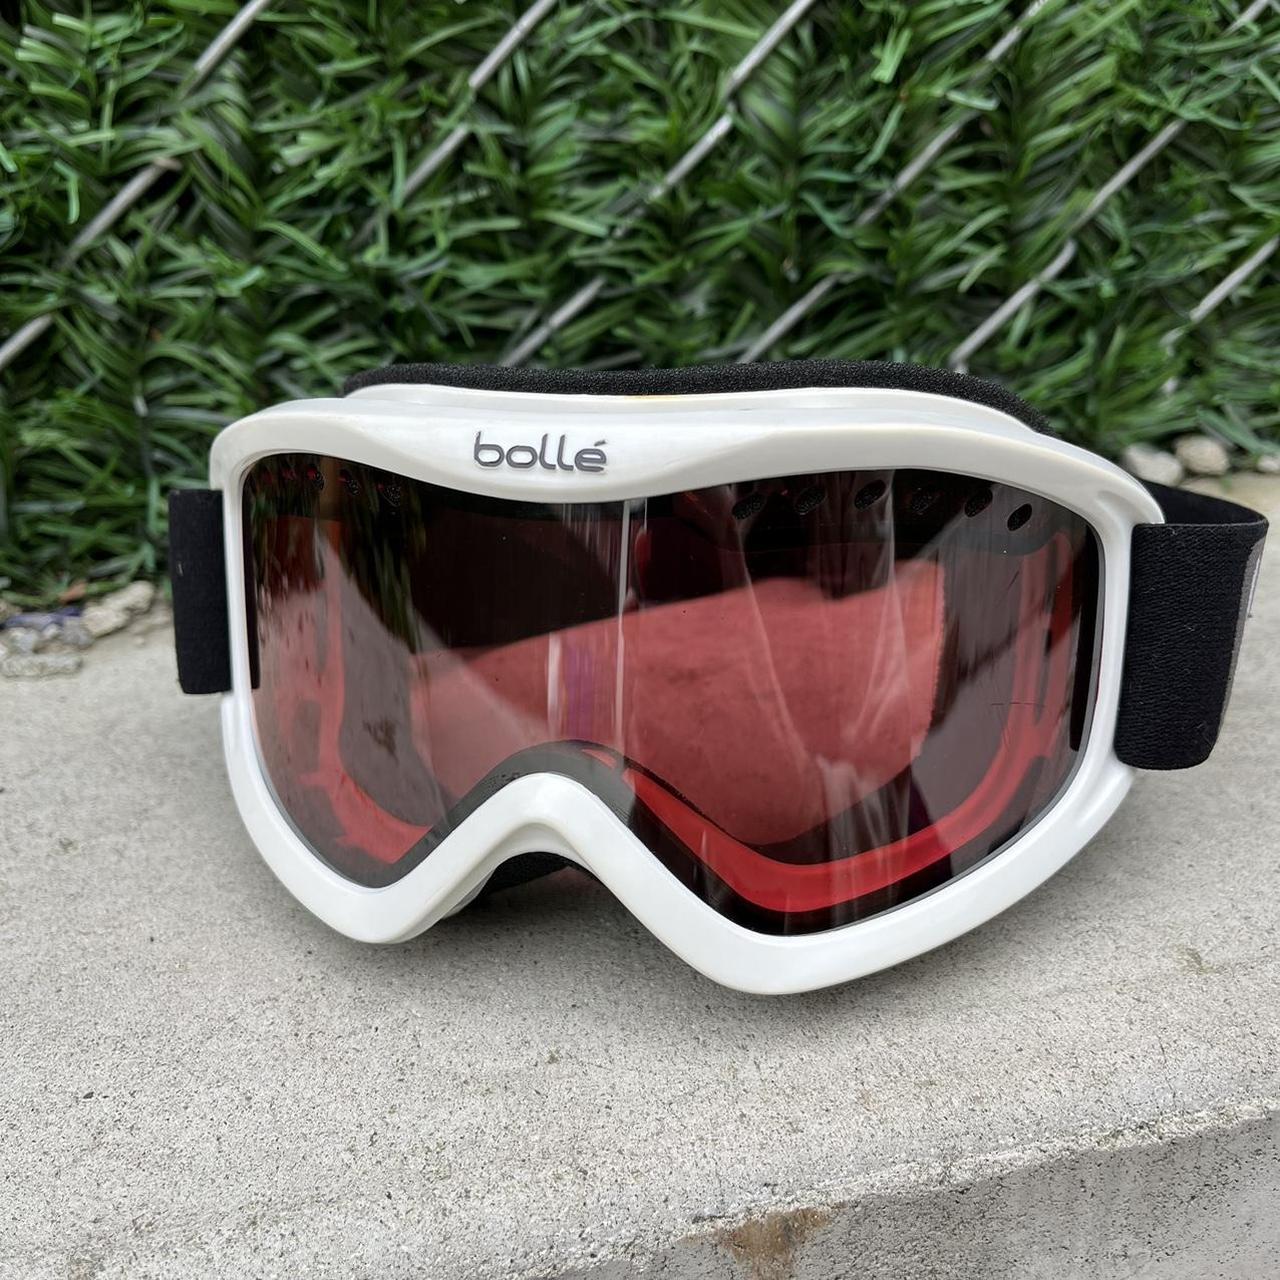 Bollé Men's White and Red Sunglasses (7)